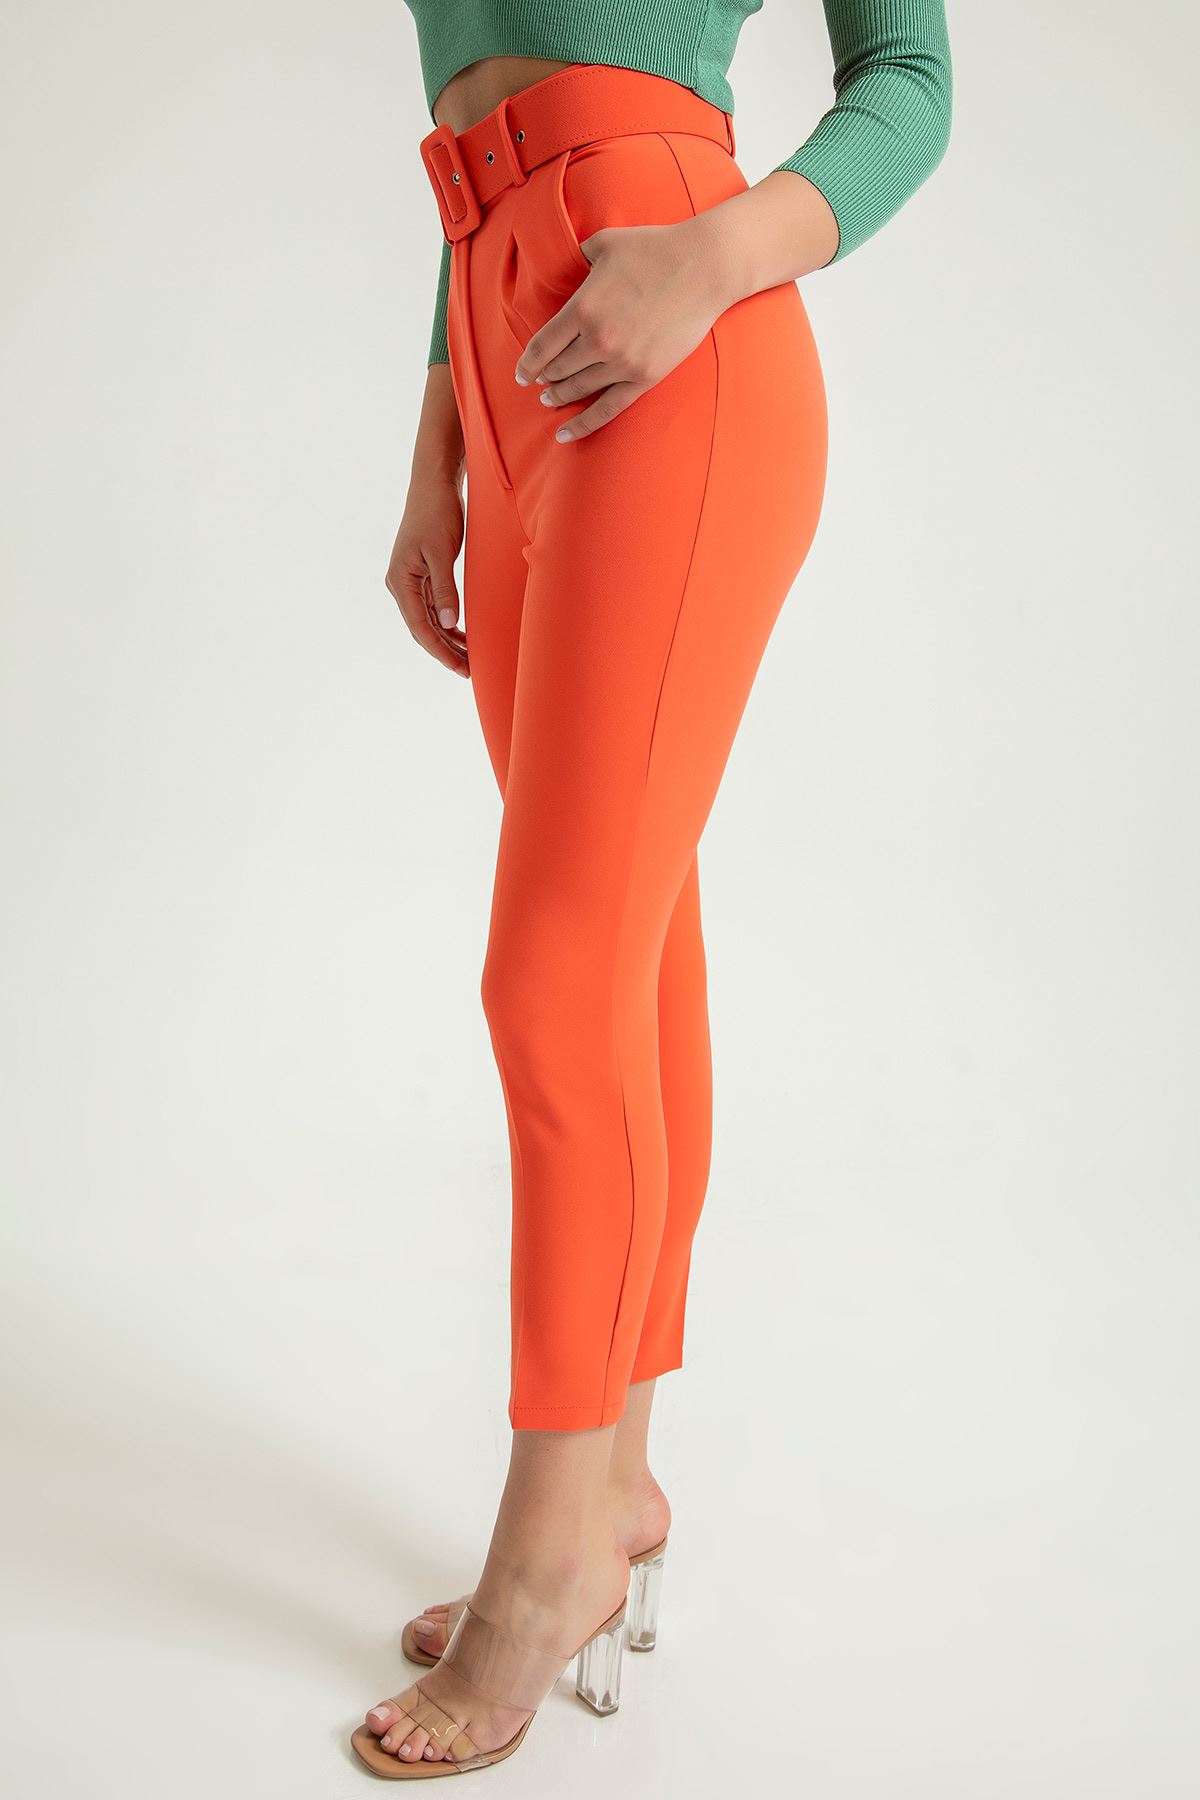 Atlas Fabric Ankle Length Tight Fit Women'S Trouser With Belt - Coral